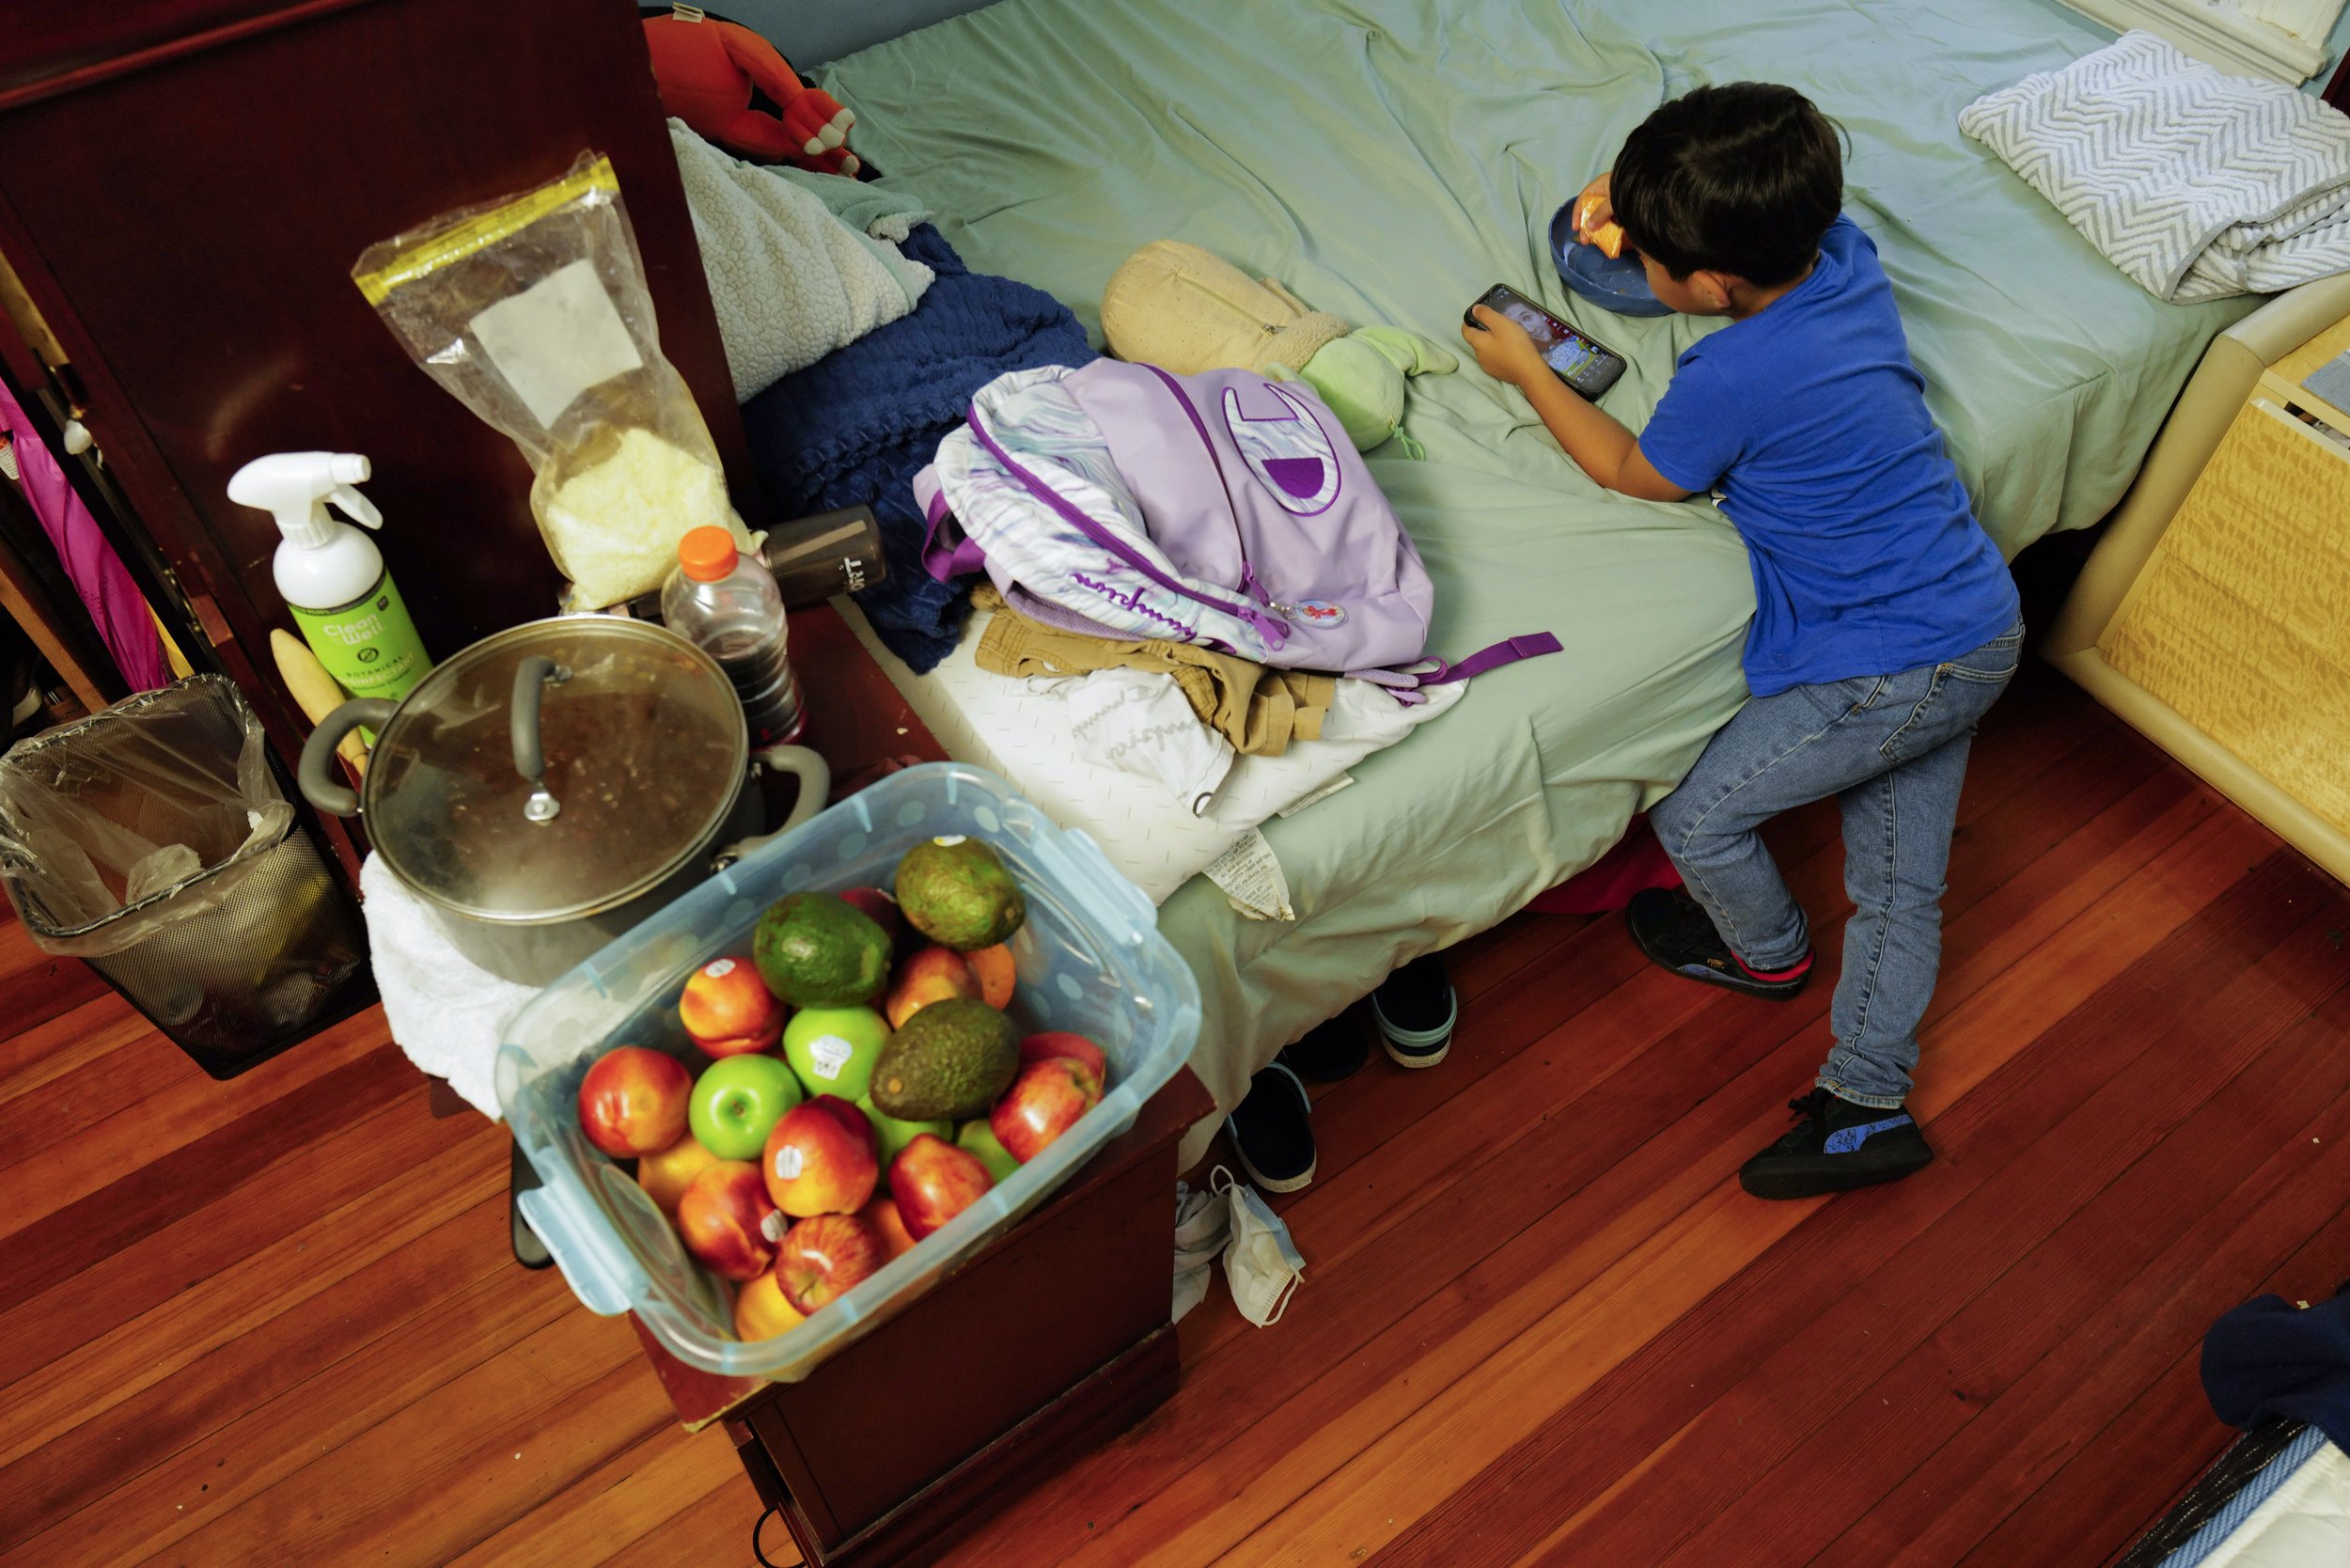  Teresa’s son, Raul Alexis, 6, eats cantaloupe inside the shared room Manuel and Teresa rent in their old residence in Somerville, Mass. on August 31, 2022. Because the room is so small, there is limited space for the family to eat all together. The 